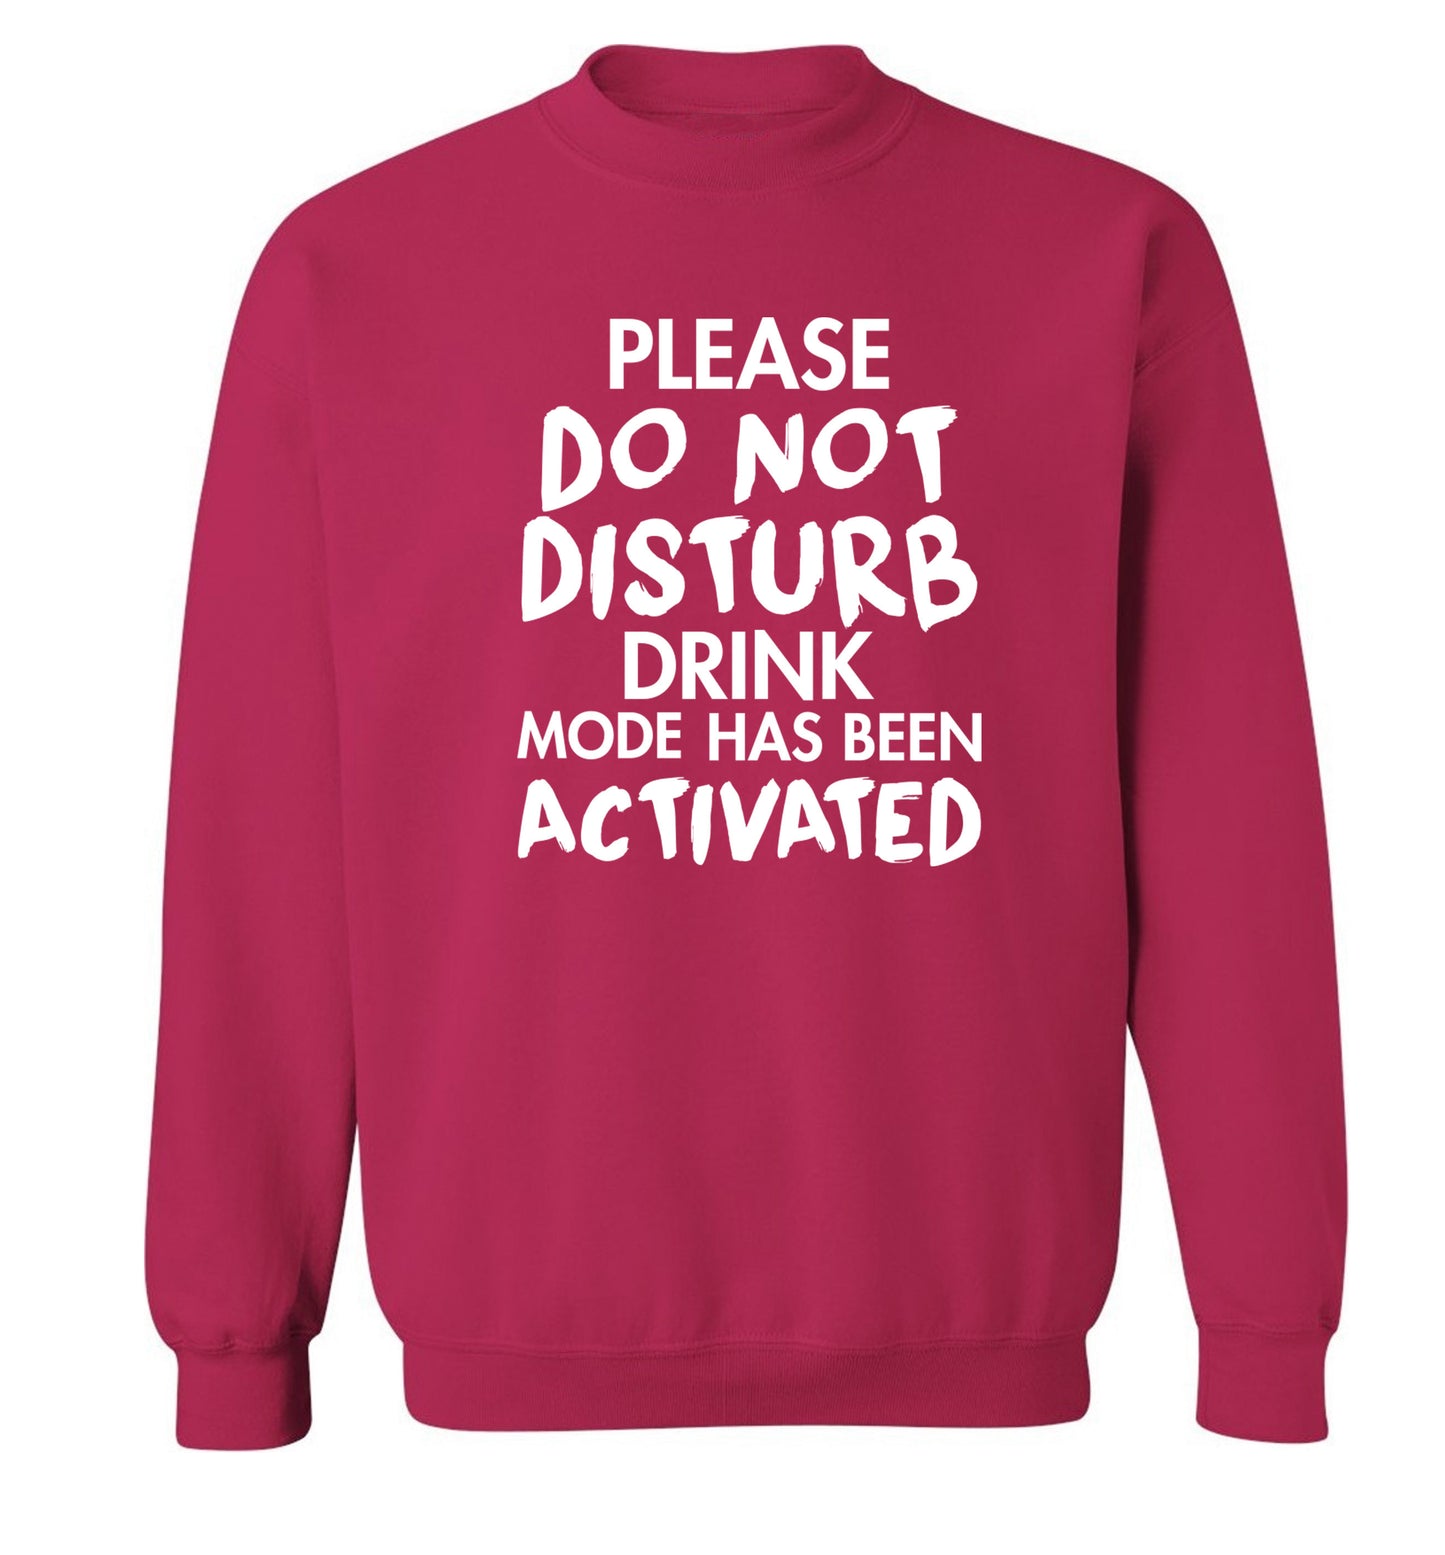 Please do not disturb drink mode has been activated Adult's unisex pink Sweater 2XL